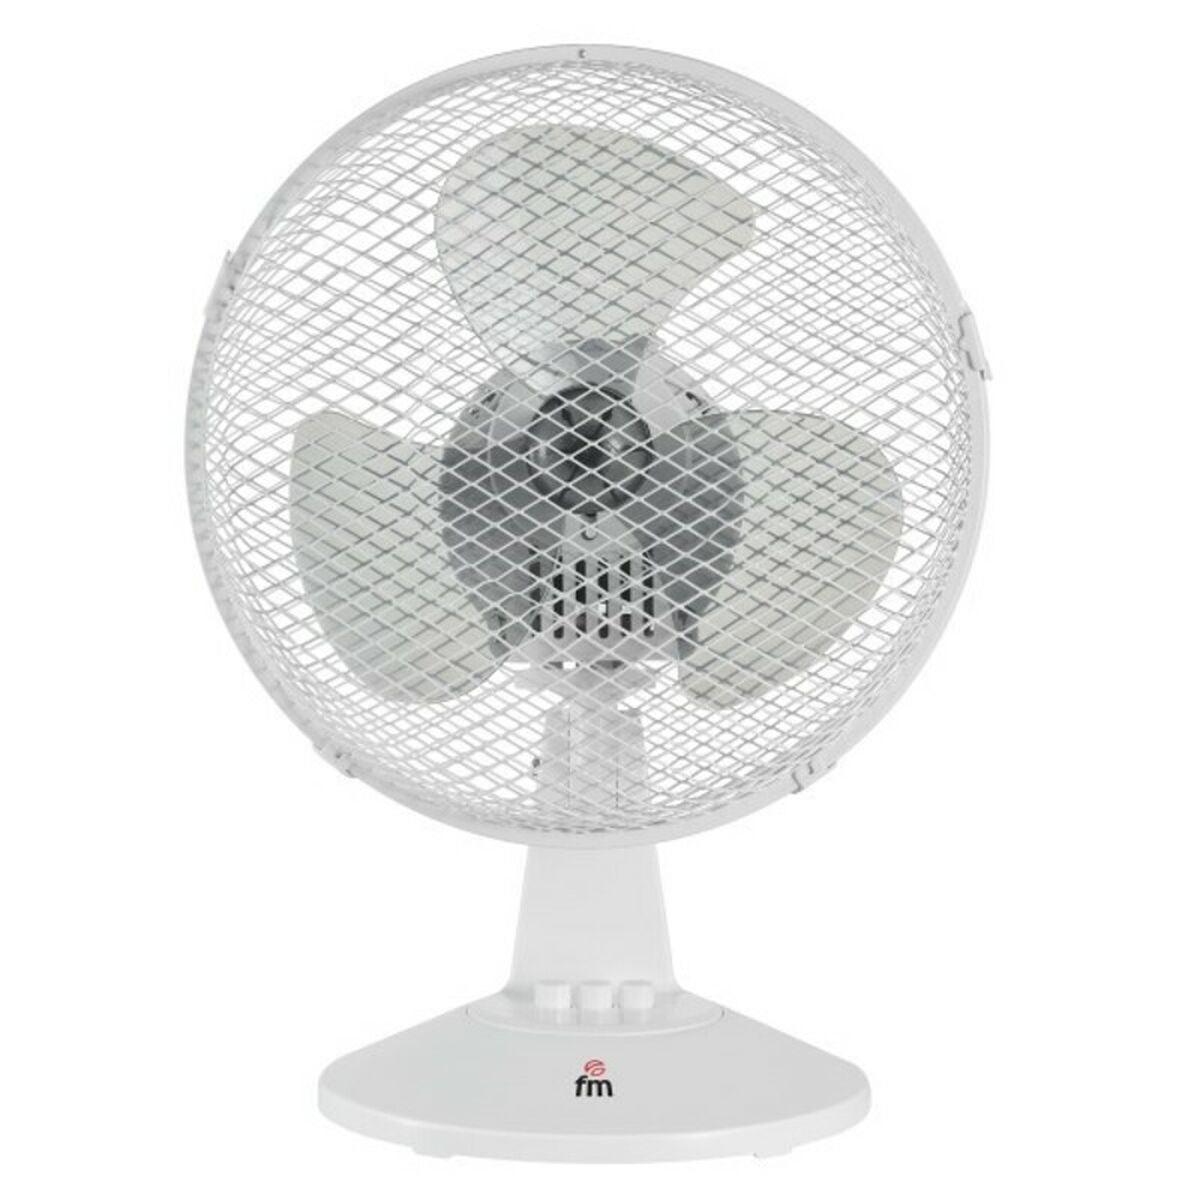 Table Fan Grupo FM 65786 25 W Ø 23 cm White, Grupo FM, Home and cooking, Portable air conditioning, table-fan-grupo-fm-65786-25-w-o-23-cm-white, Brand_Grupo FM, category-reference-2399, category-reference-2450, category-reference-2451, category-reference-t-19656, category-reference-t-21087, category-reference-t-25217, Condition_NEW, ferretería, Price_20 - 50, summer, RiotNook